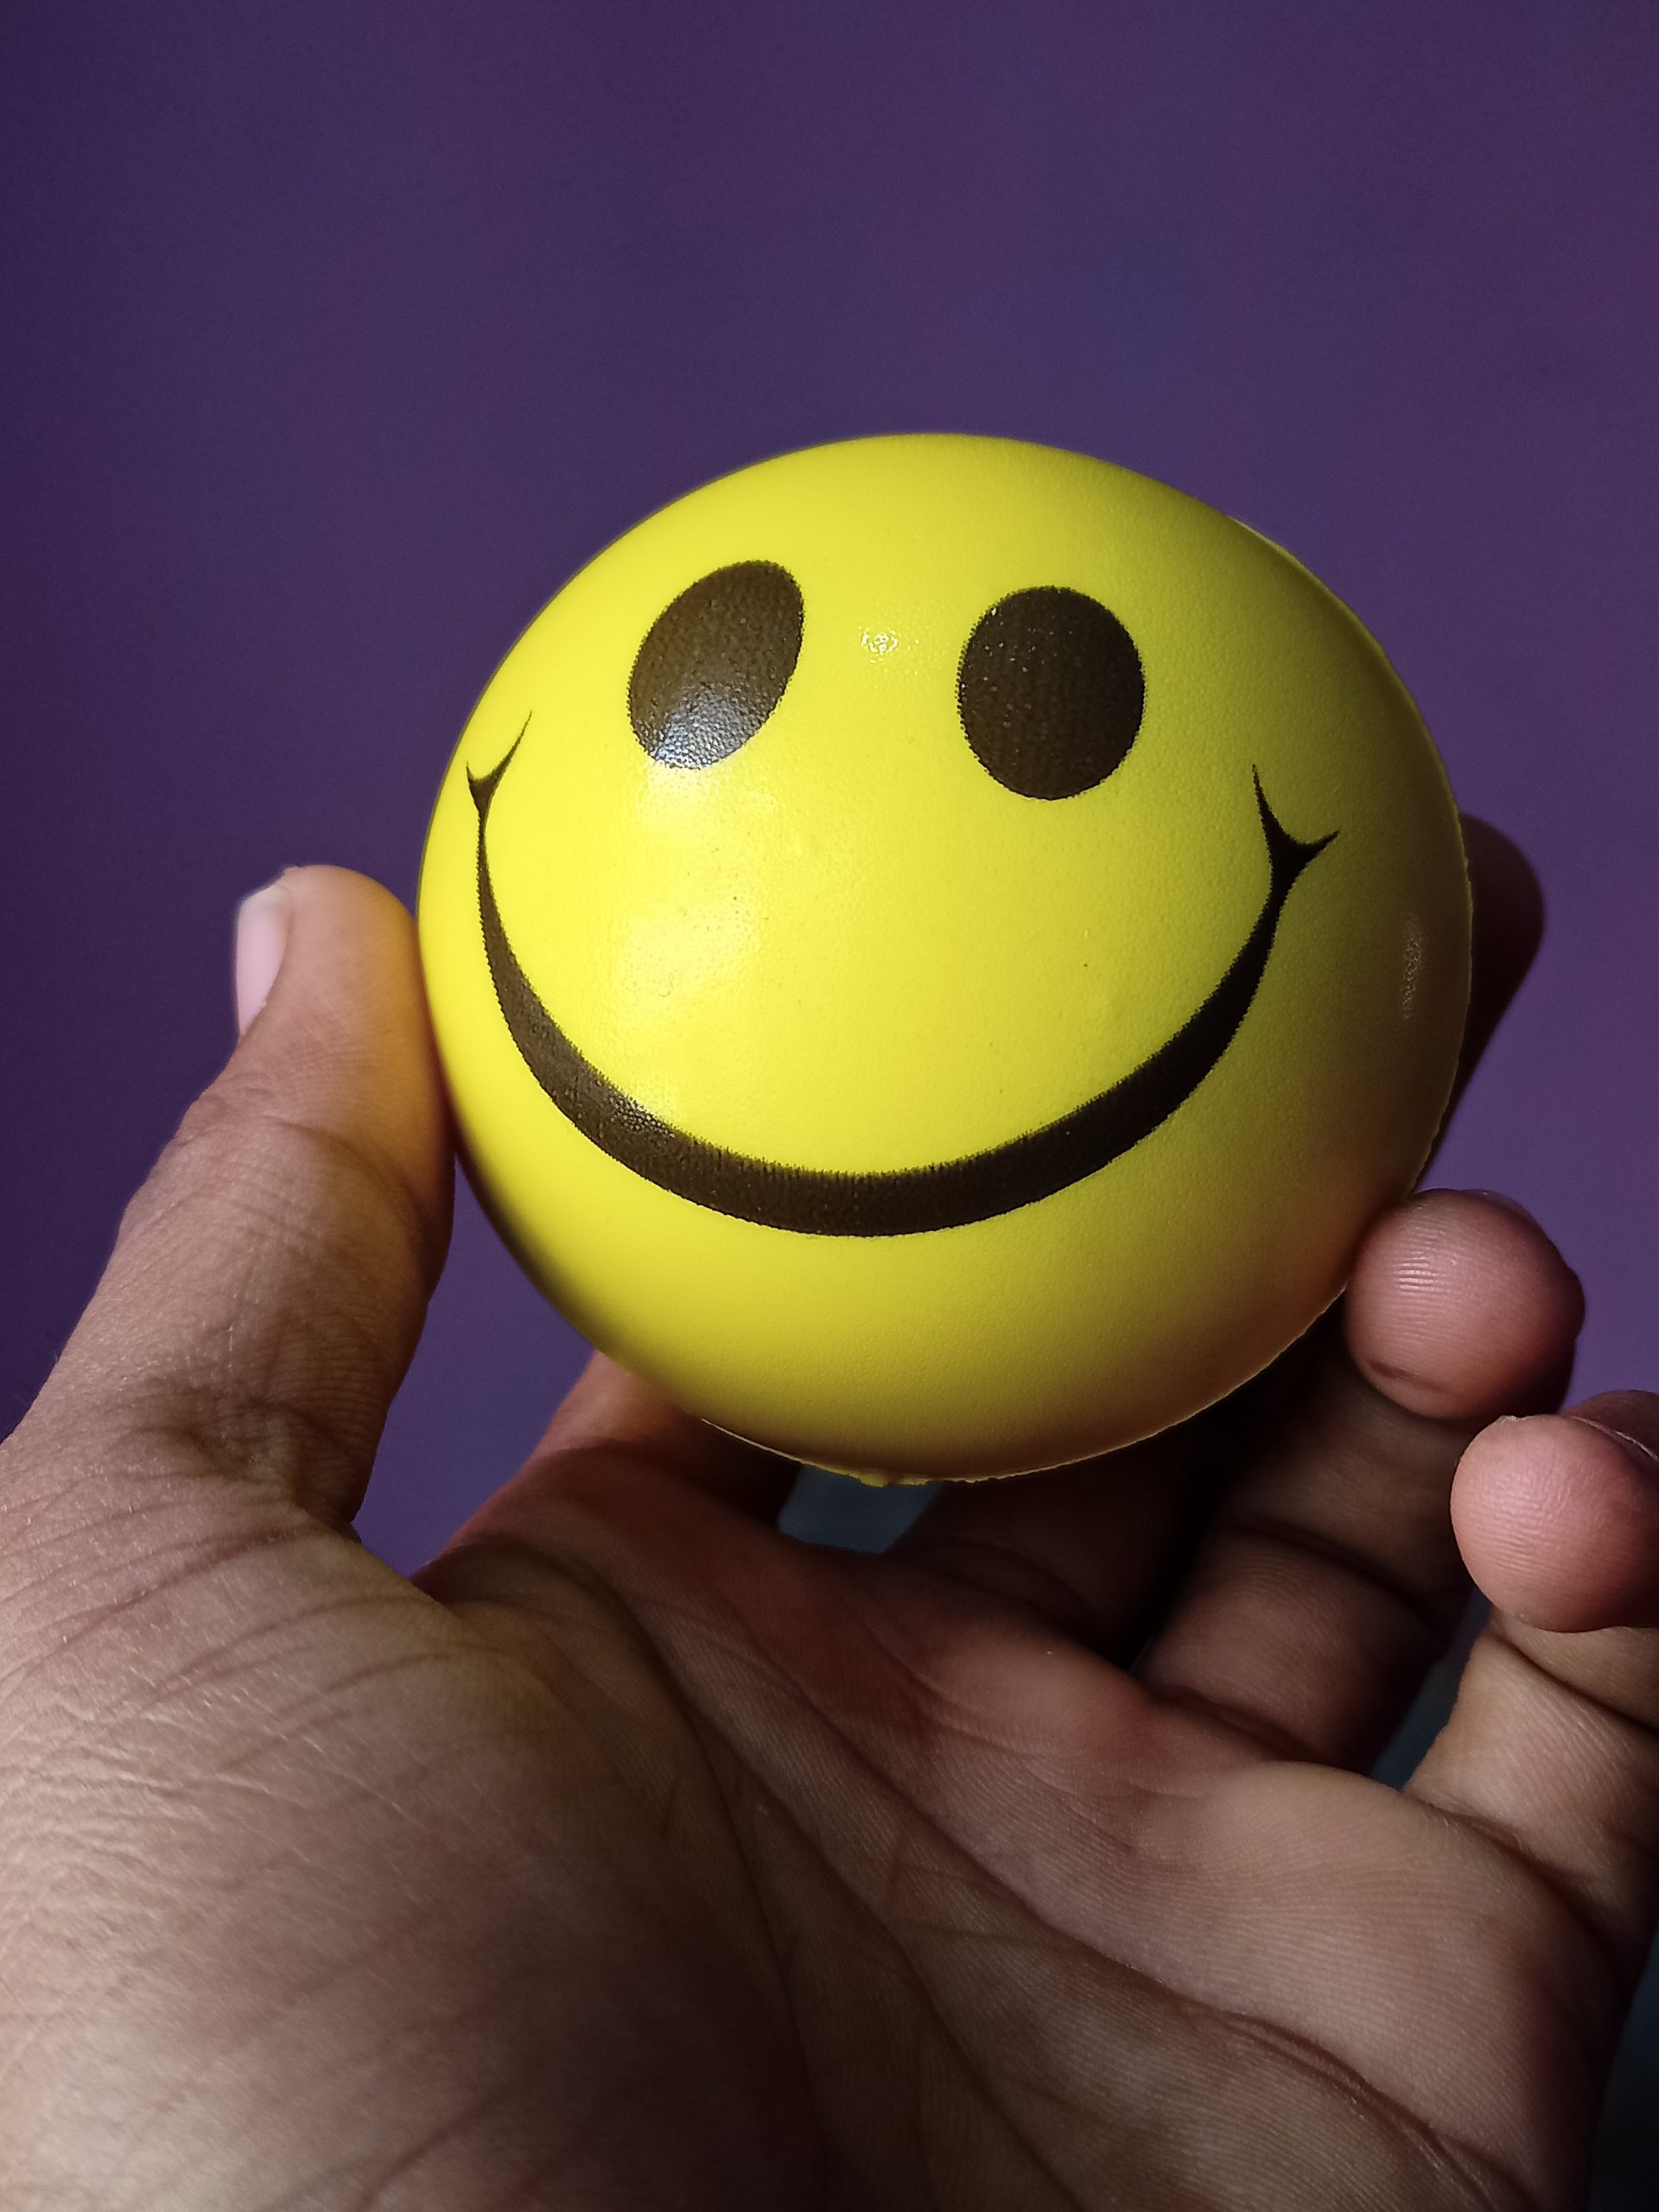 smiley ball in hand